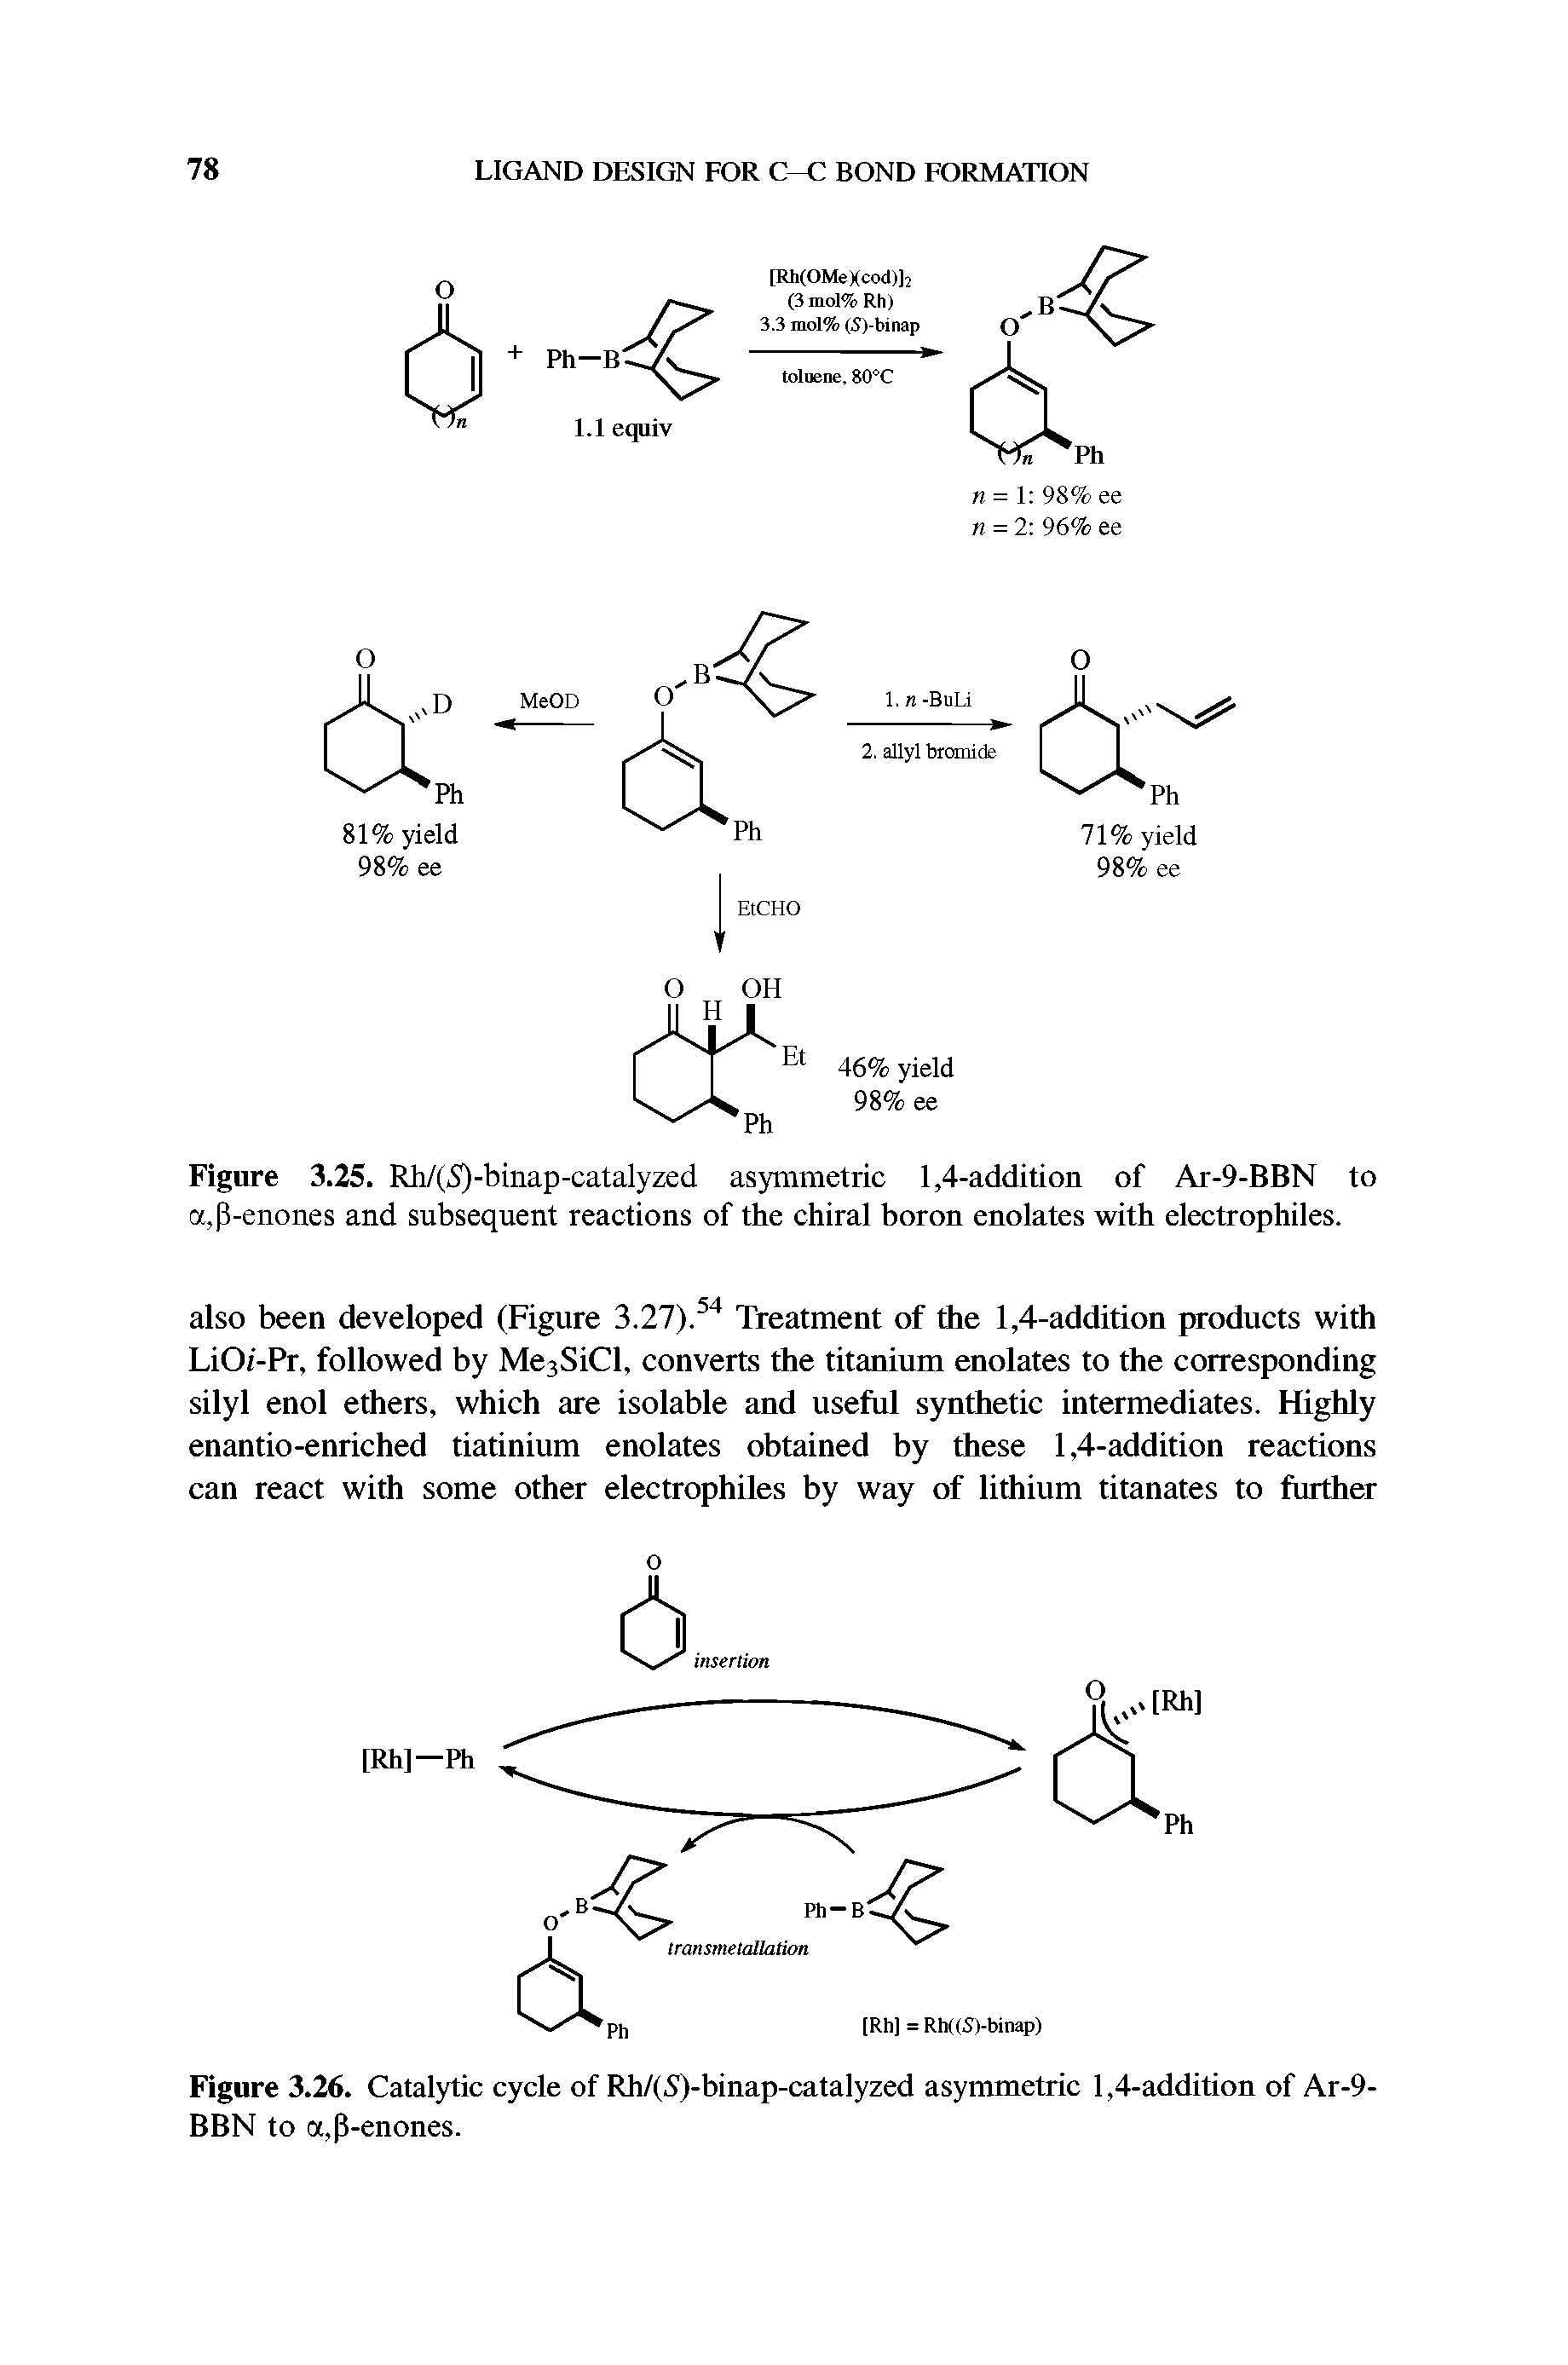 Figure 3.25. Rh/(5)-binap-catalyzed asymmetric 1,4-addition of Ar-9-BBN to a,P-enones and subsequent reactions of the chiral boron enolates with electrophiles.